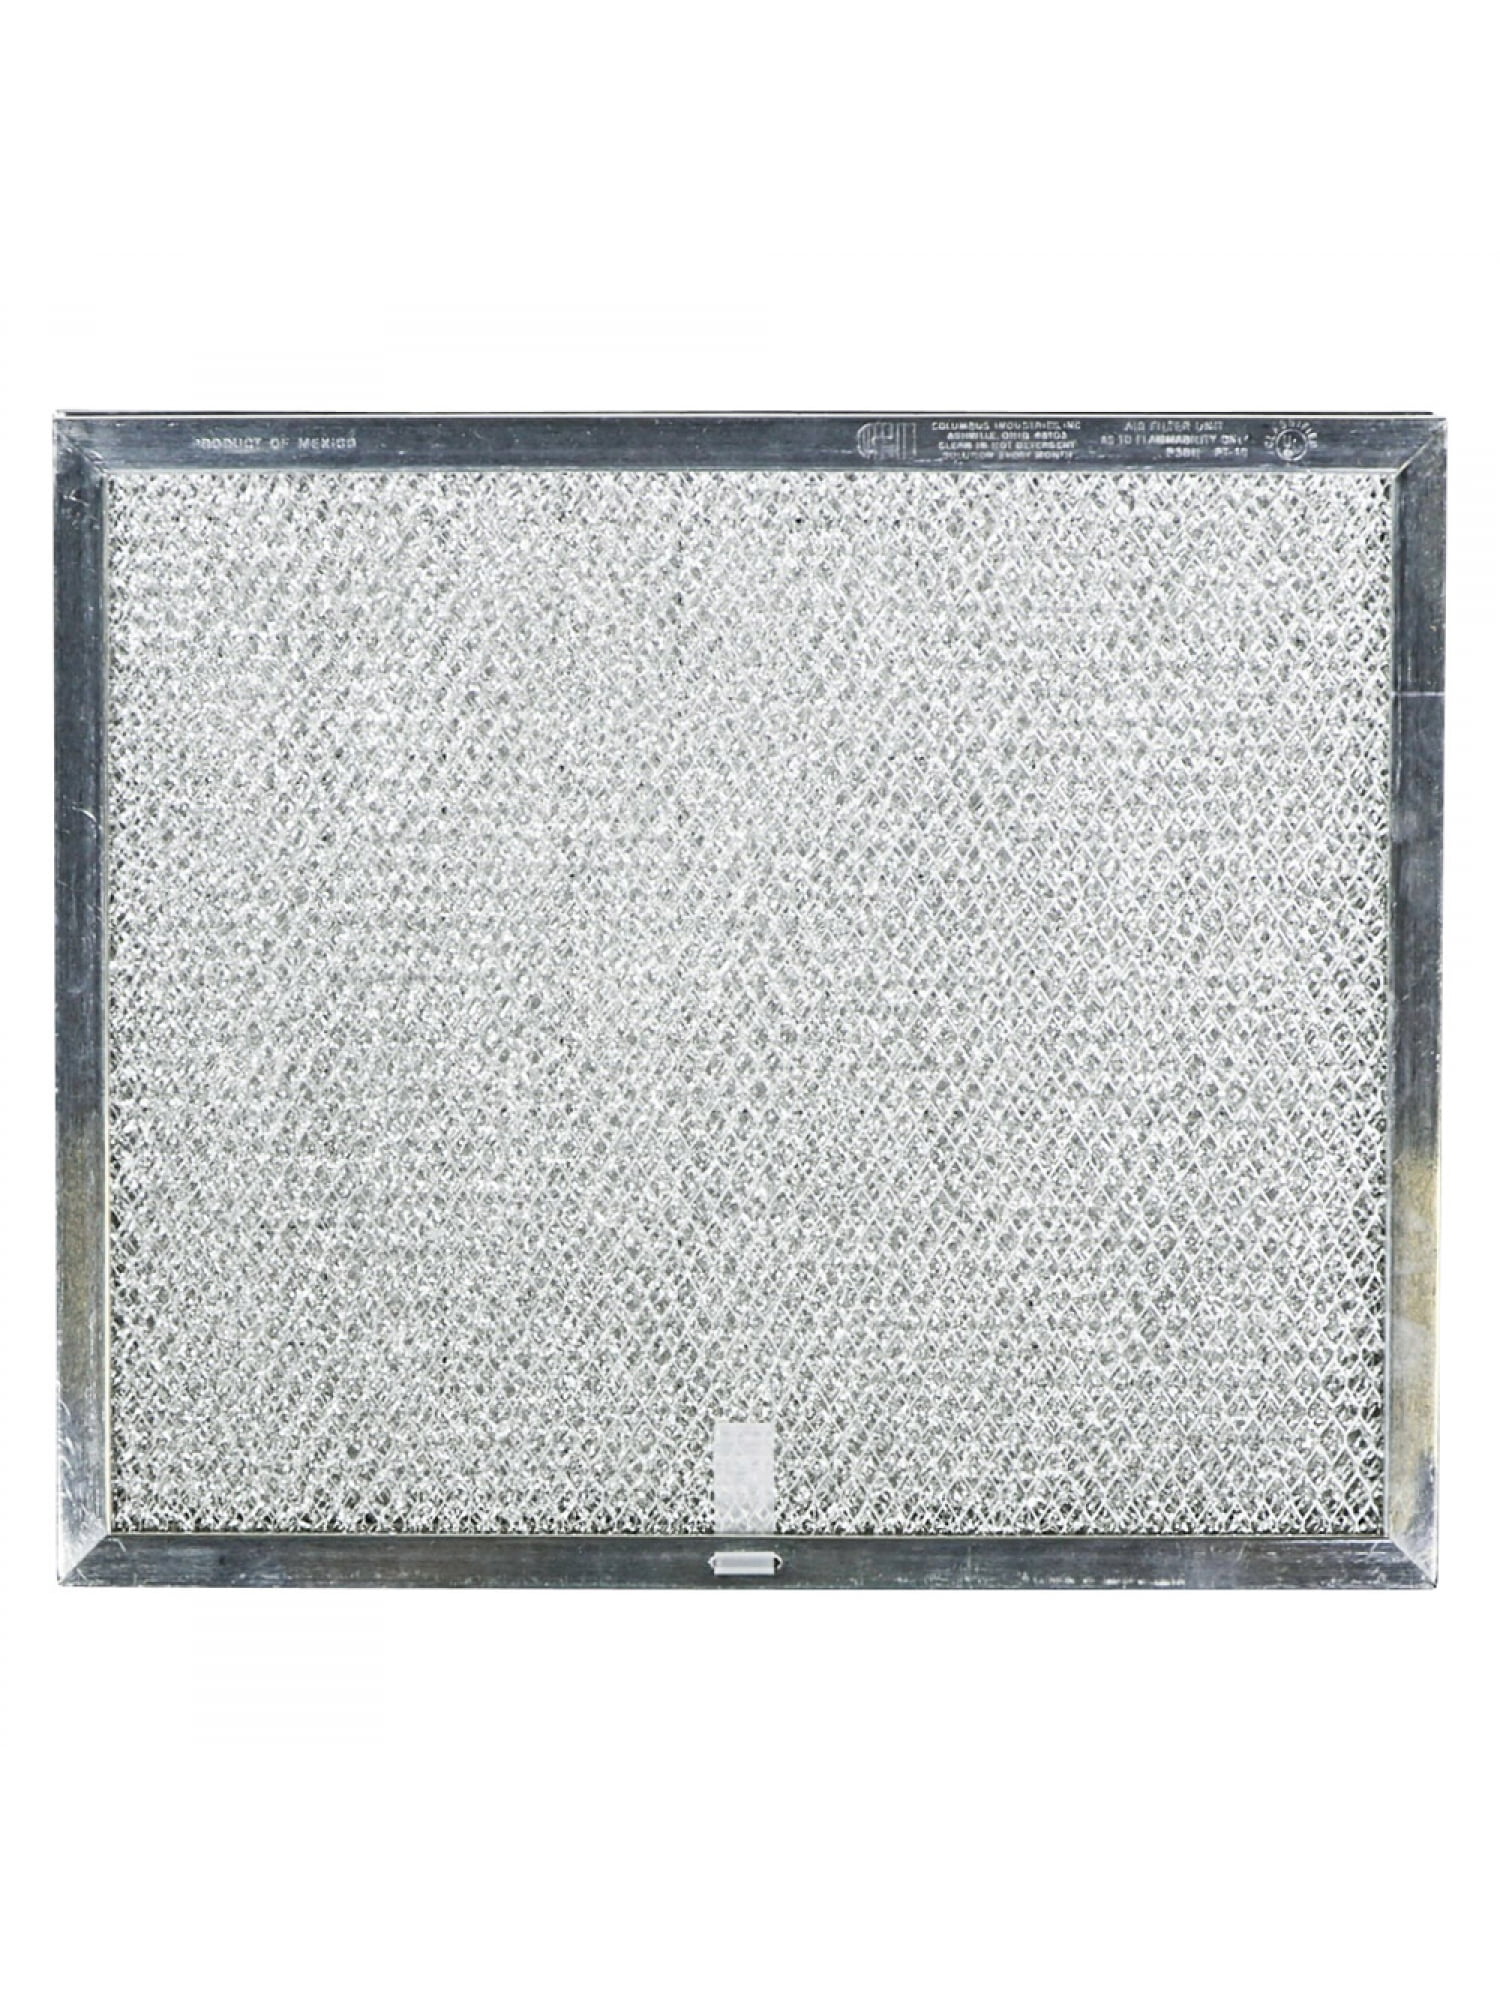 Replacement Aluminum Carbon Hood Vent Filter for 99010316 Fits Broan Models 